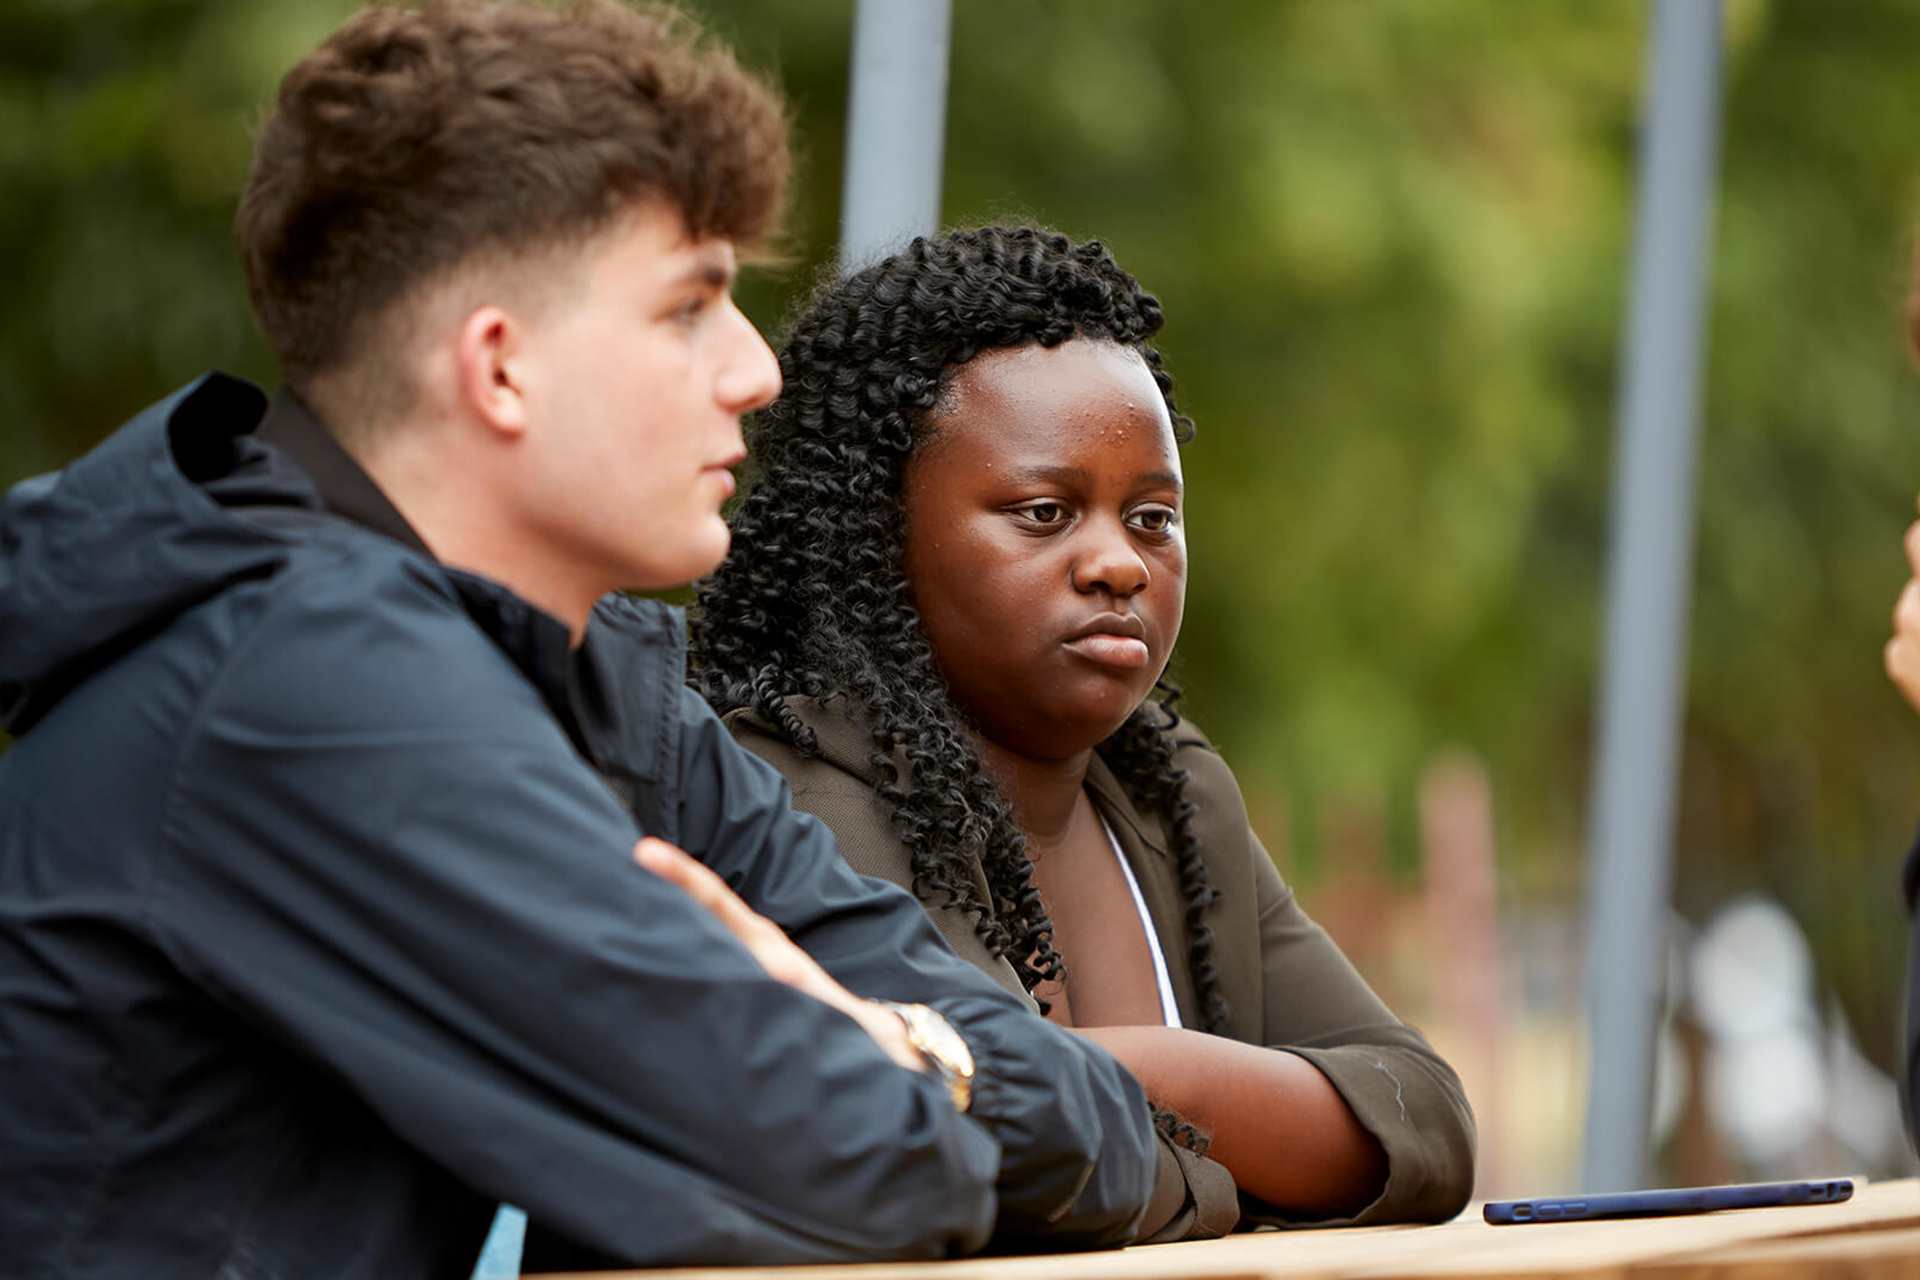 Two young people listening intently to their friend while sitting on a bench in a park.